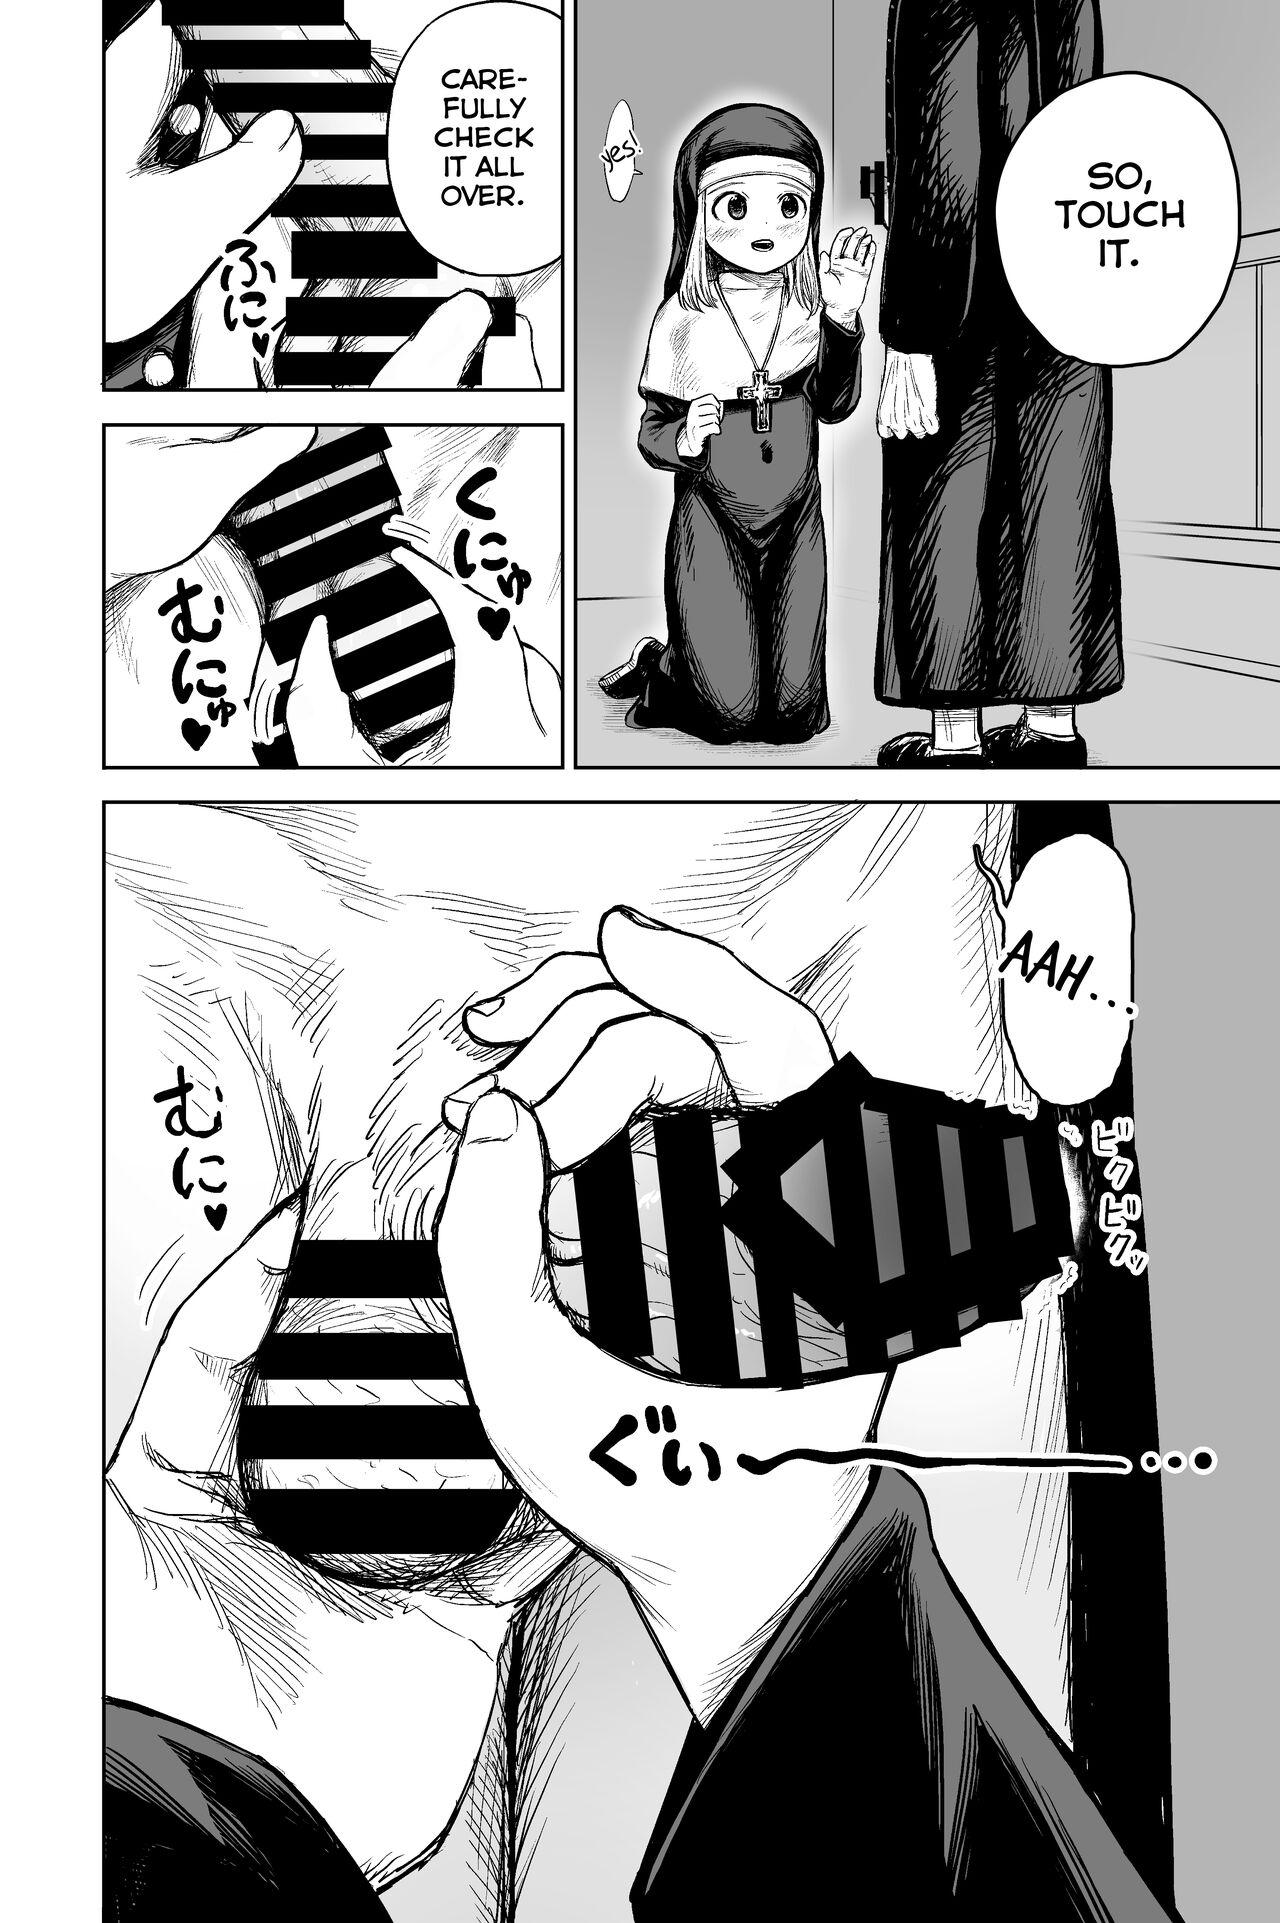 Stroking Loli Sister to Sex suru Isshuukan | A Week of Sex With a Loli Nun Reversecowgirl - Page 11